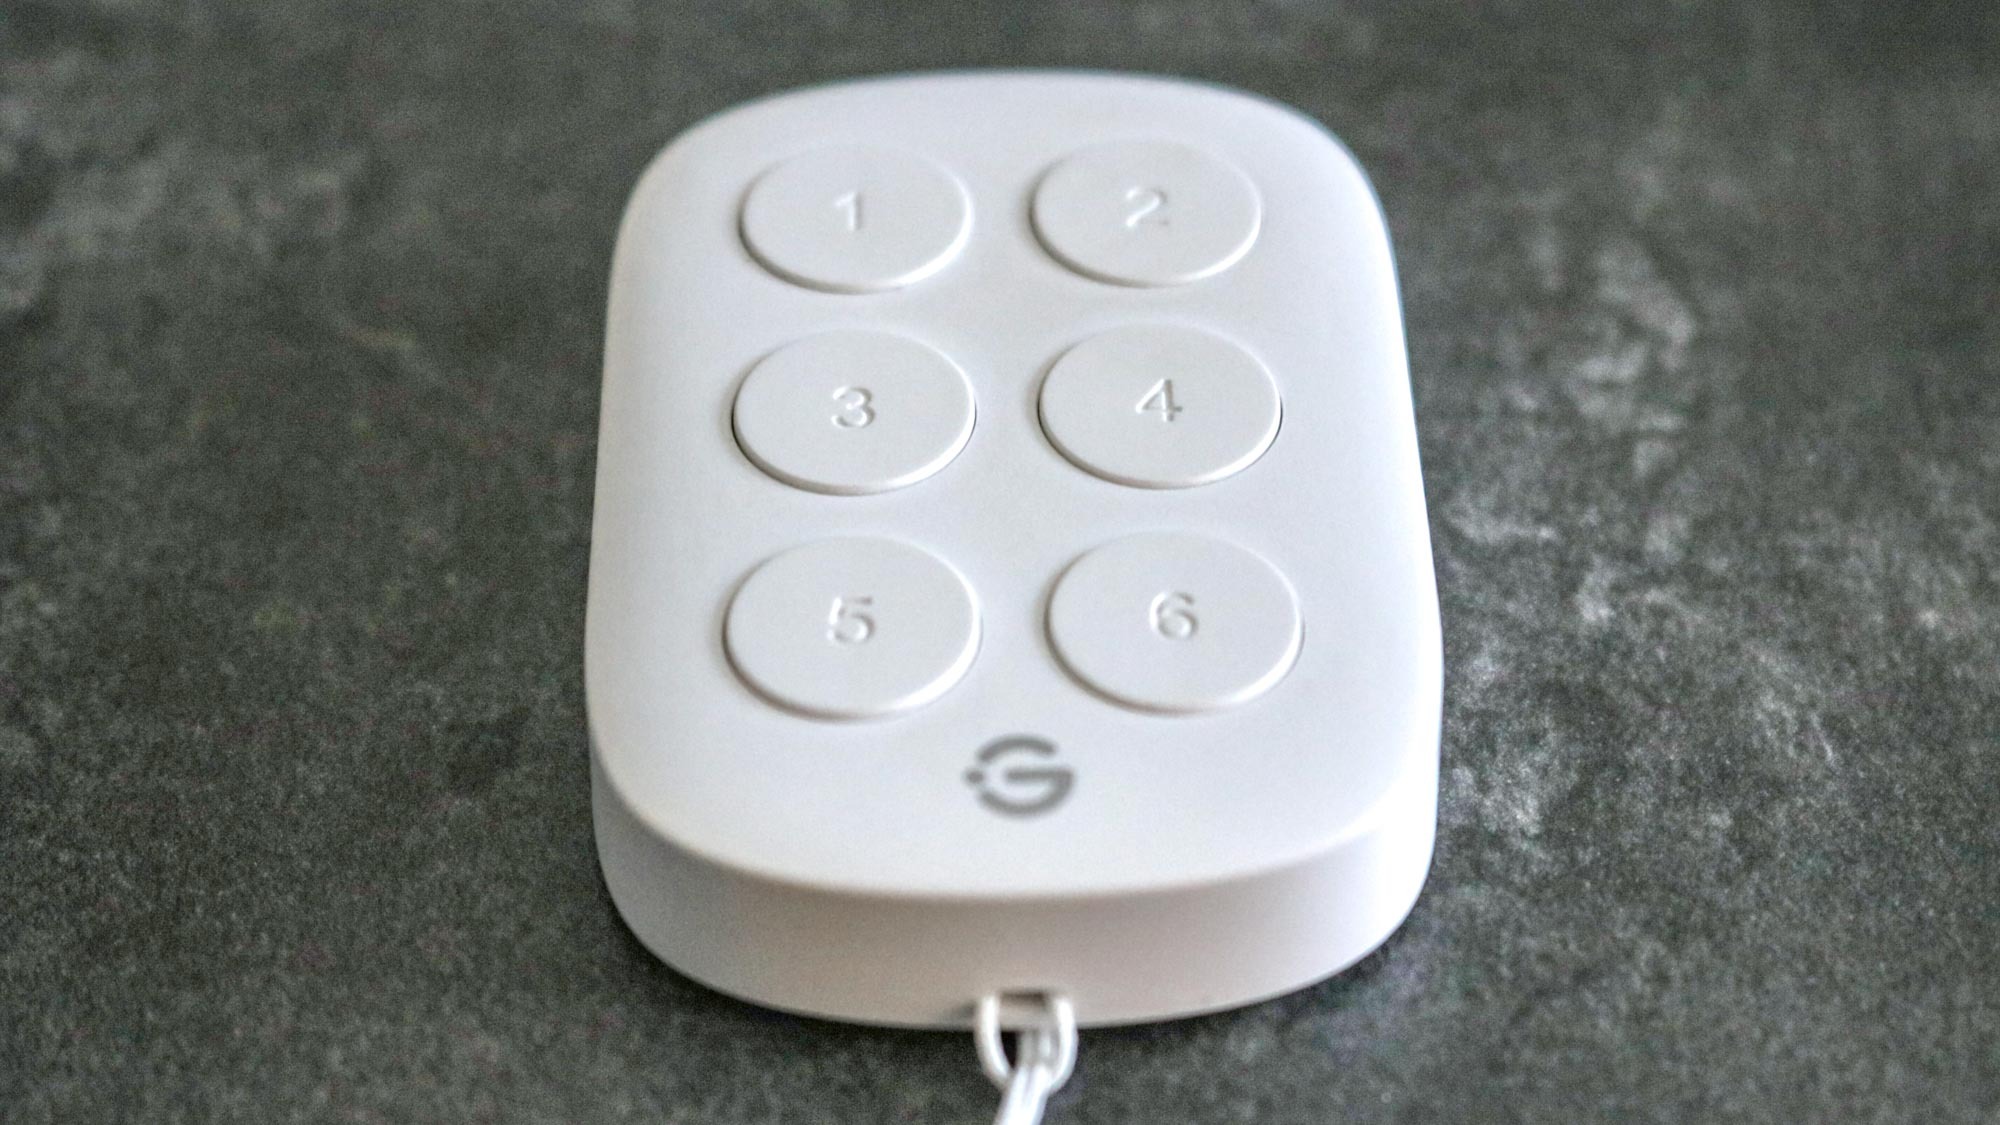 A close up view of the Govee Smart Button Sensor with six buttons